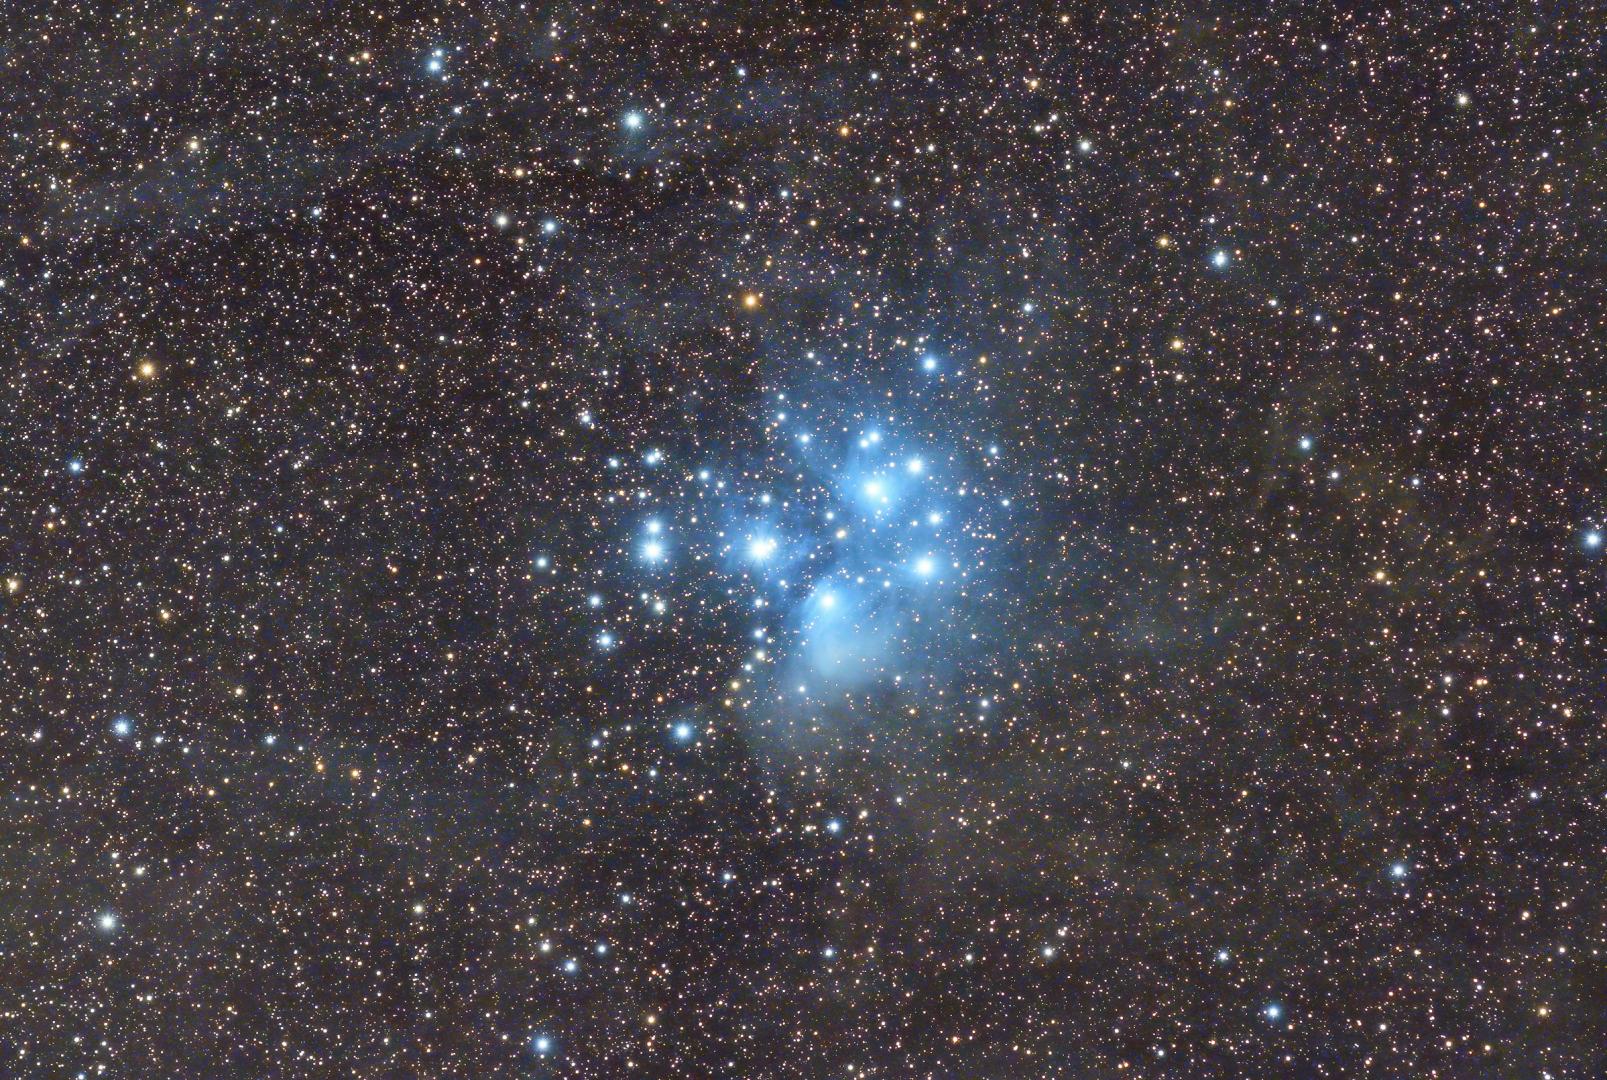 The Pleiades Star Cluster in Taurus